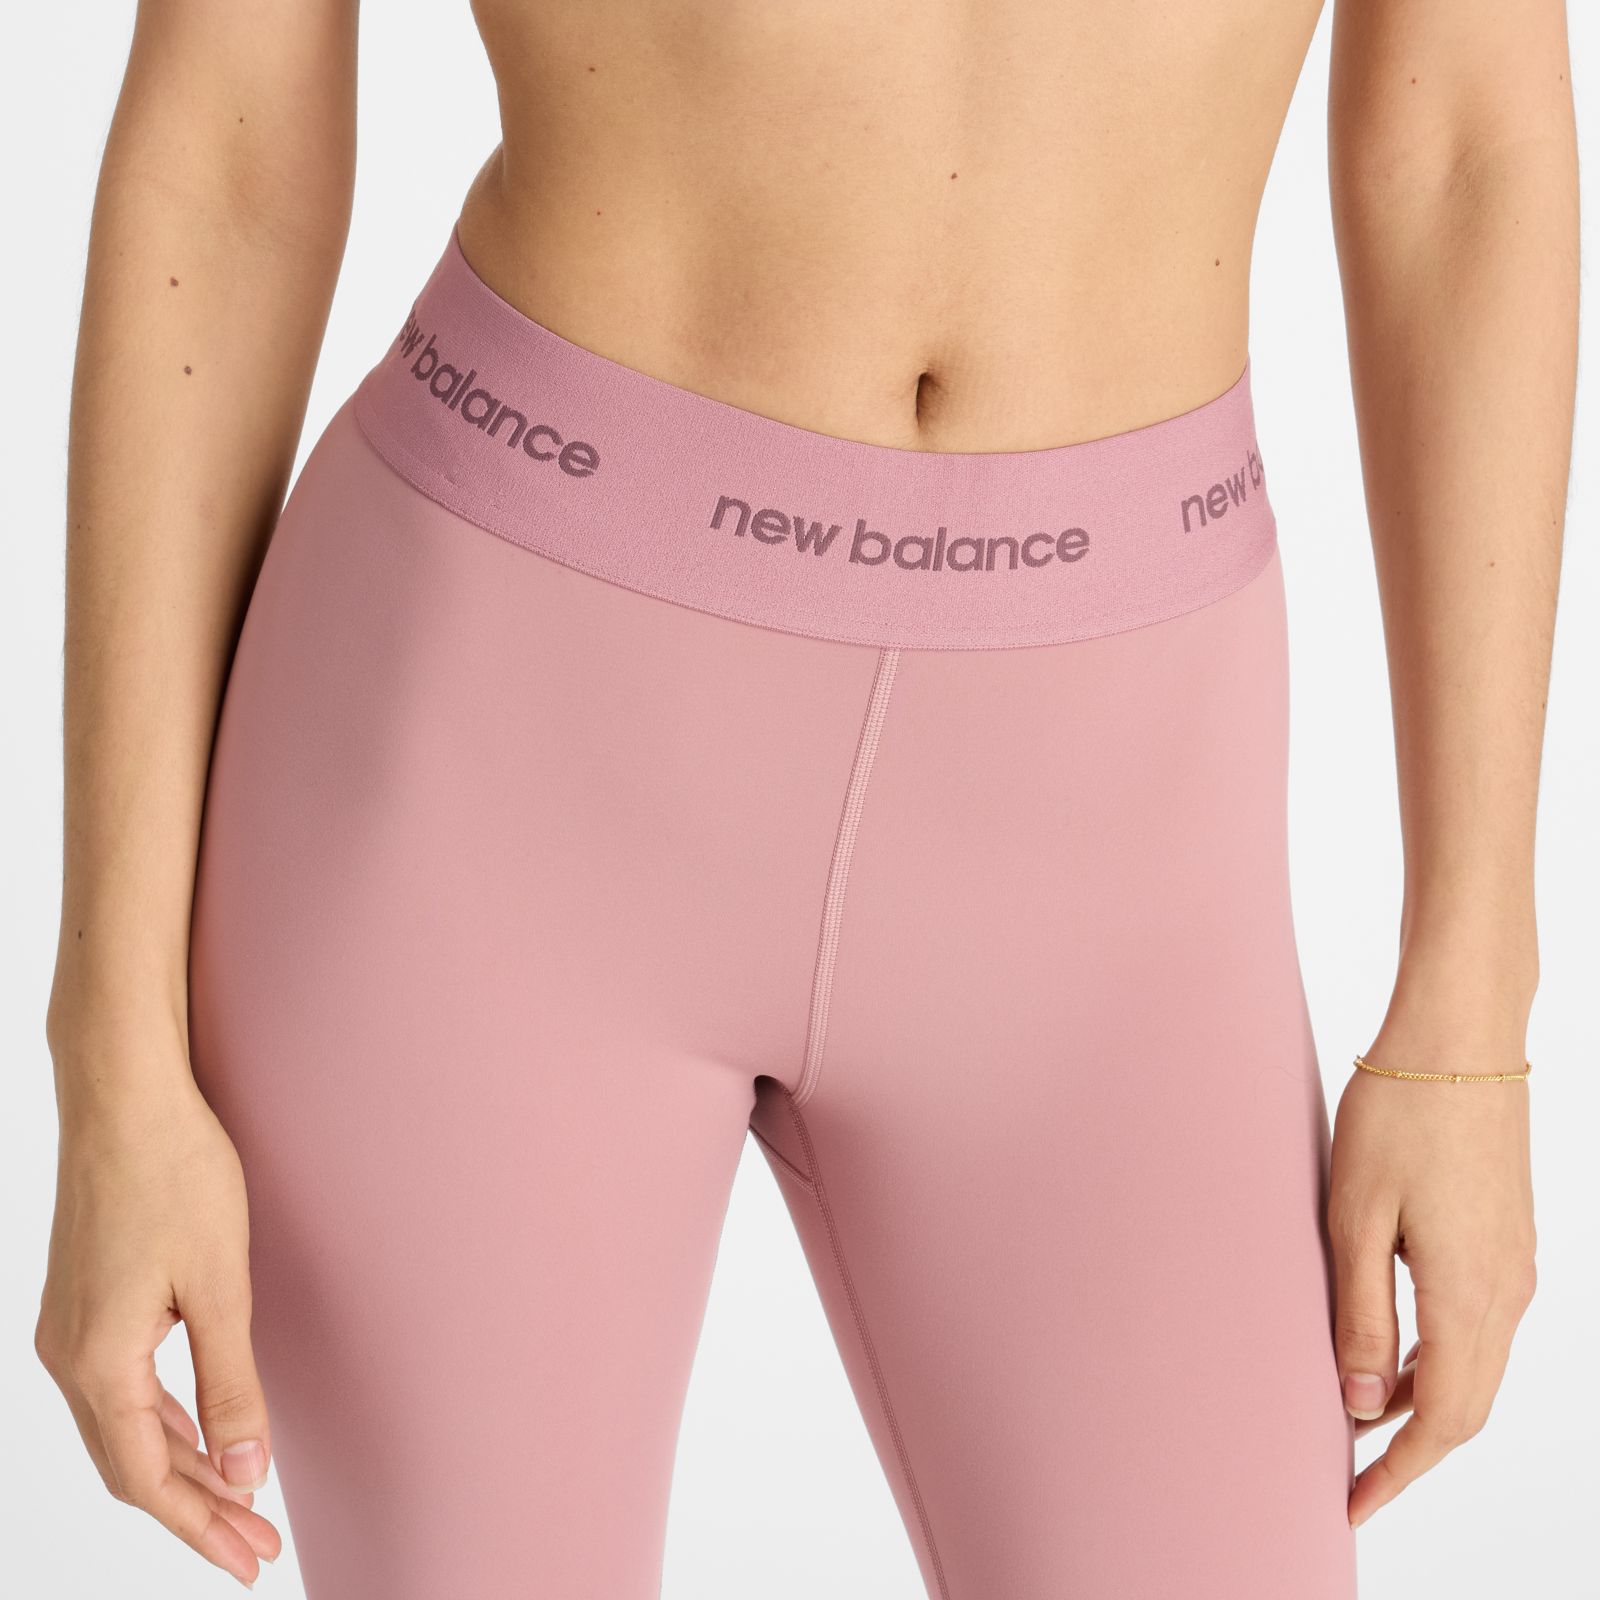 New Balance Evolve Running Leggings With Pockets Gray And Pink Size Small -  $18 - From Glam